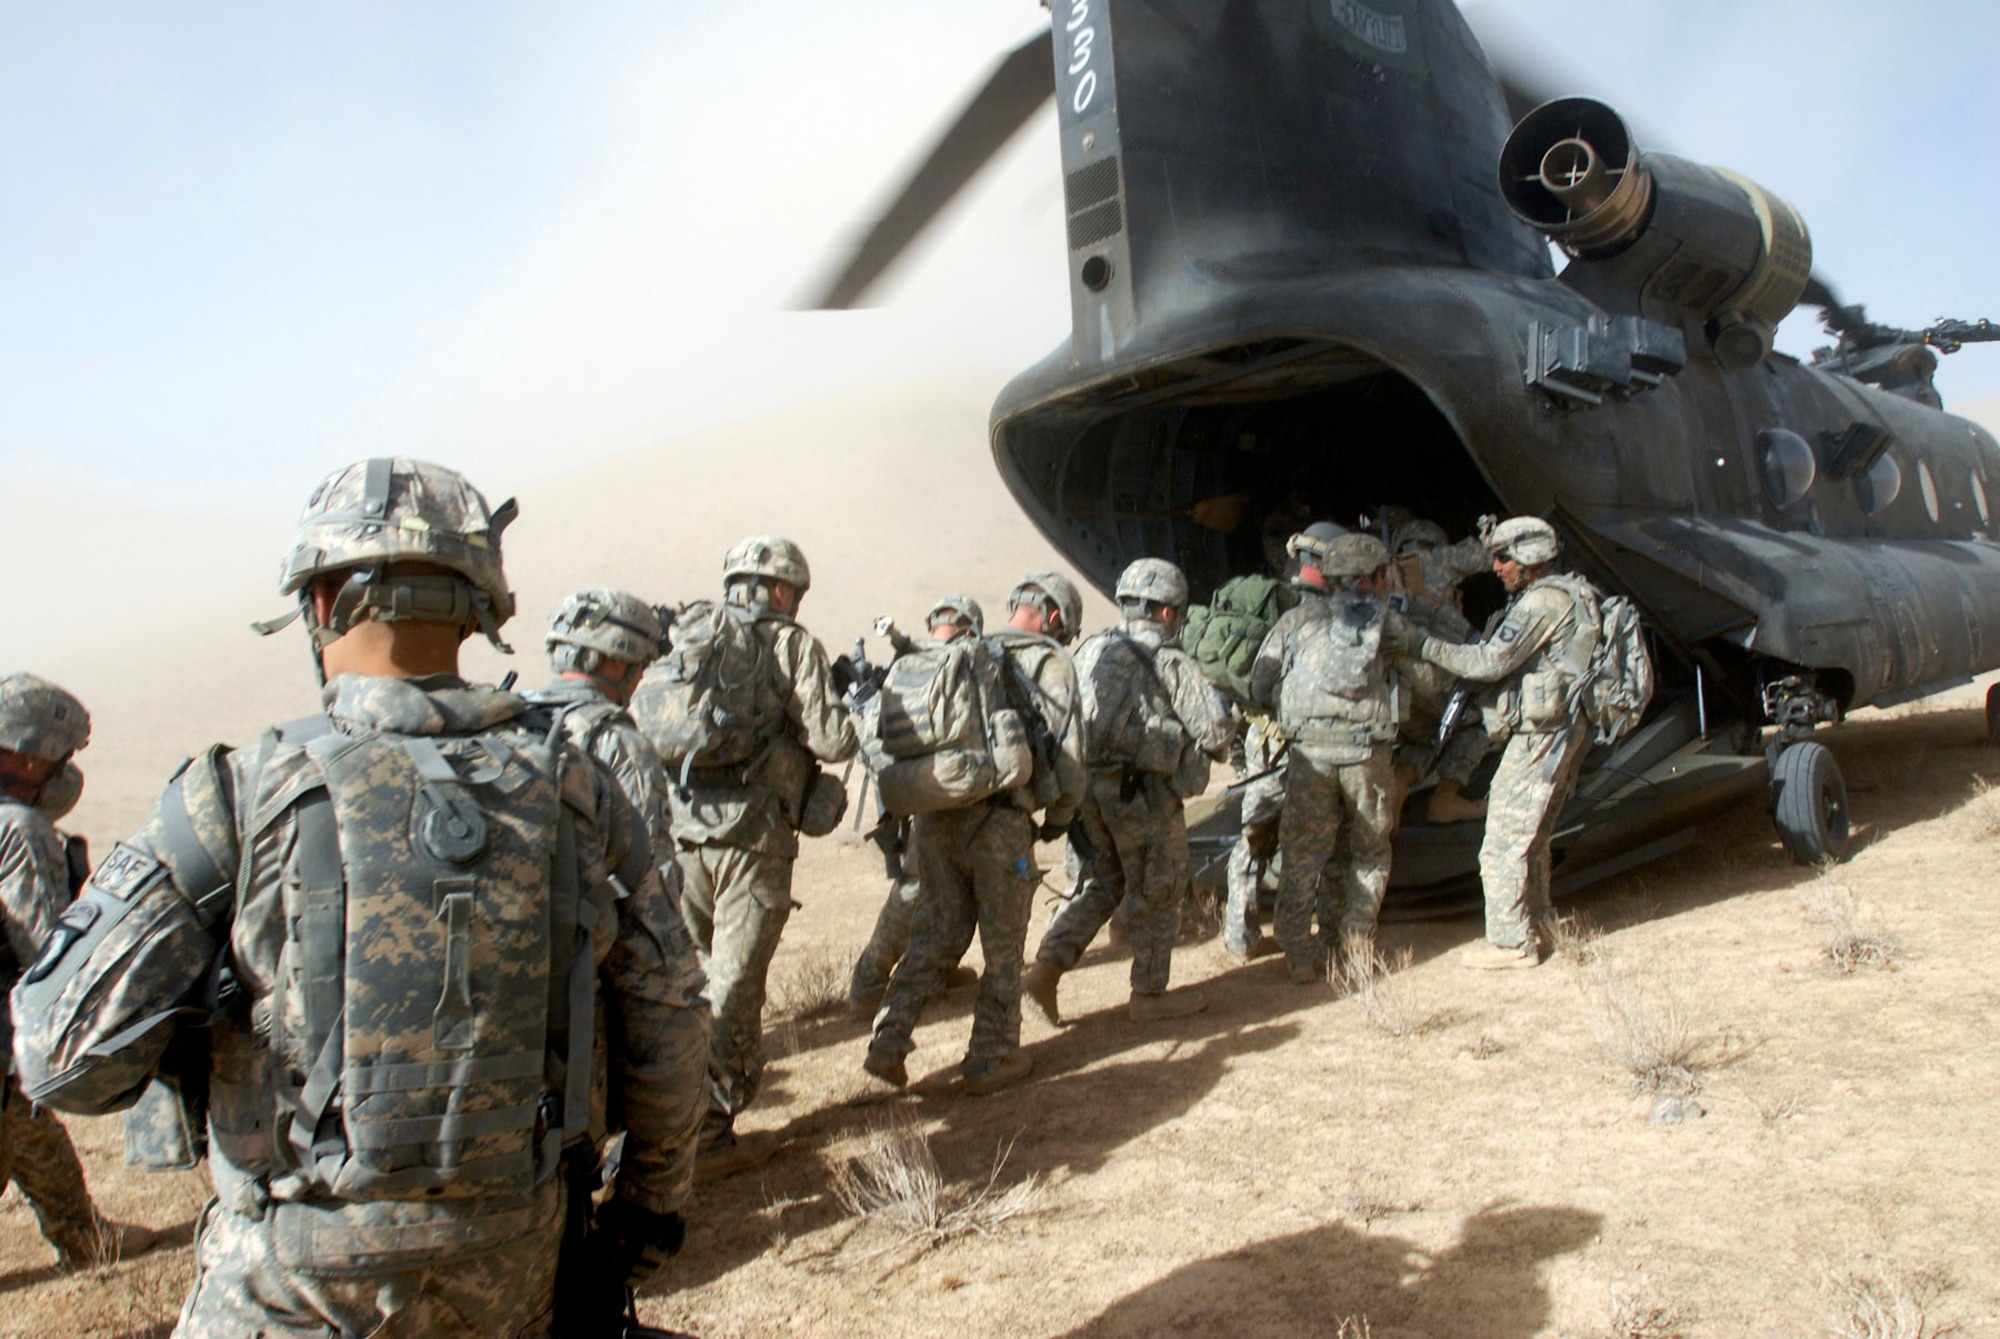 Like a stampede, Soldiers with the 101st Division Special Troops Battalion, 101st Airborne Division, rush into a Chinook helicopter as it briefly touches down to take them back to Bagram Air Field, Afghanistan Nov. 4, 2008.  The troops were conducting an air assault mission in a small village in eastern Afghanistan to search for IED making materials and facilities. (Photo by Spc. Mary L. Gonzalez, CJTF-101 Public Affairs)